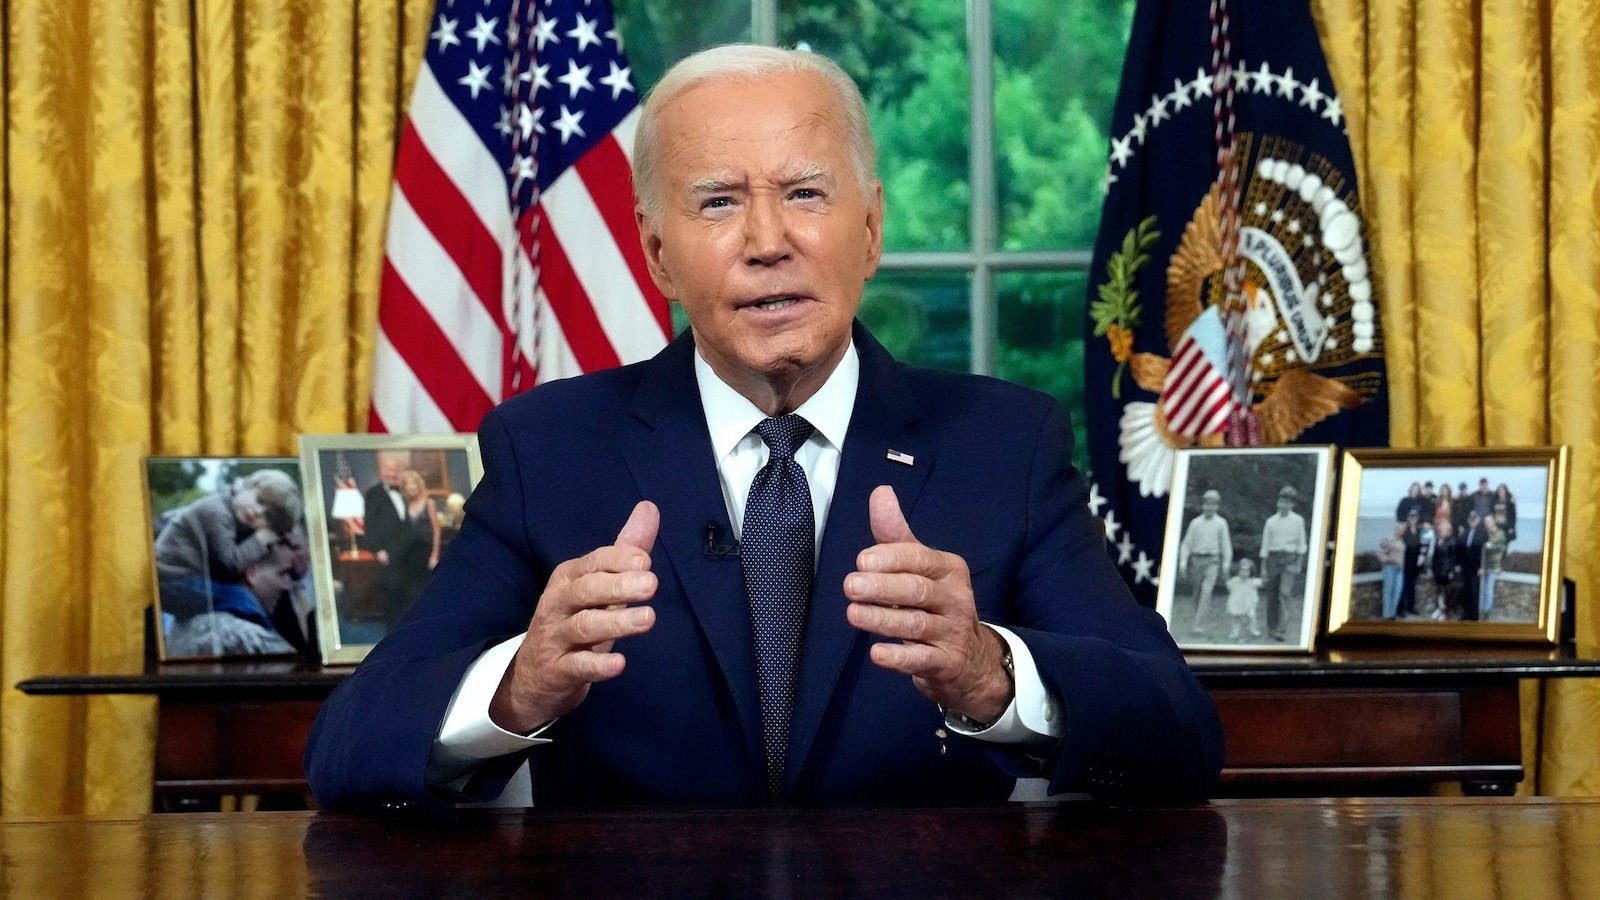 Biden to give prime-time address on decision to exit 2024 race and what comes next